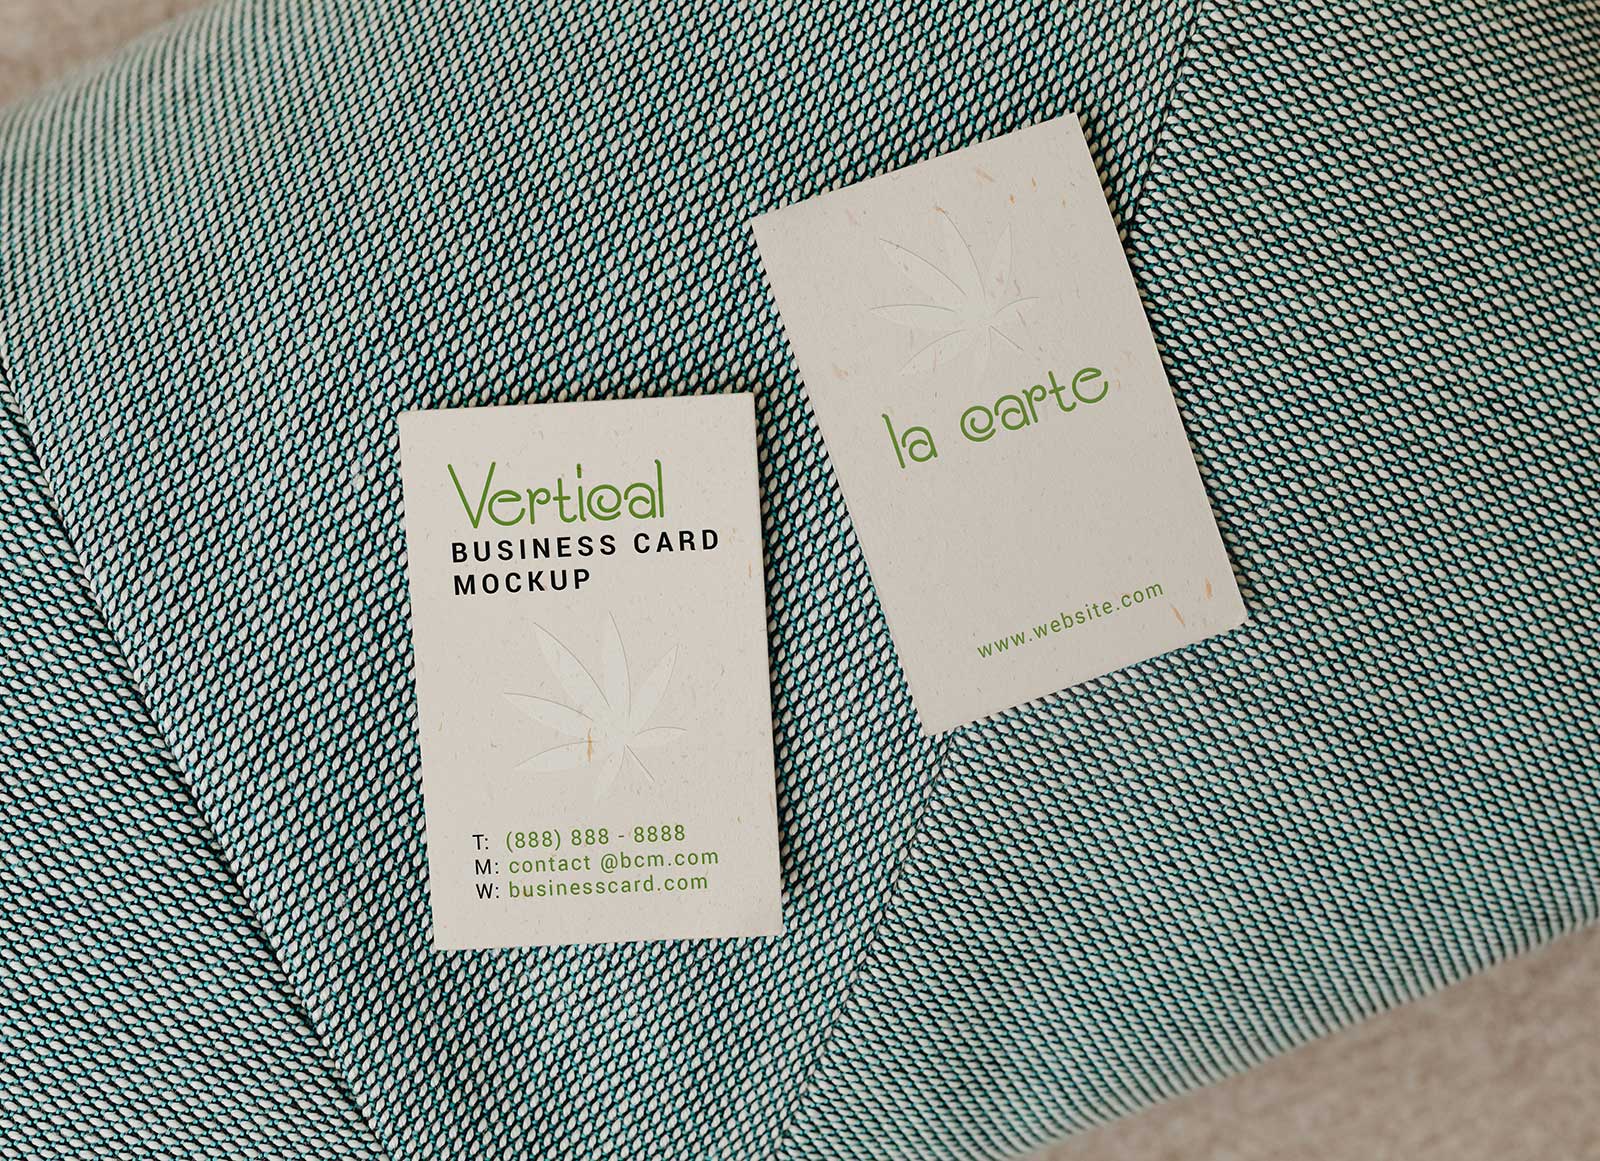 Free-Textured-Vertical-Business-Card-Mockup-PSD